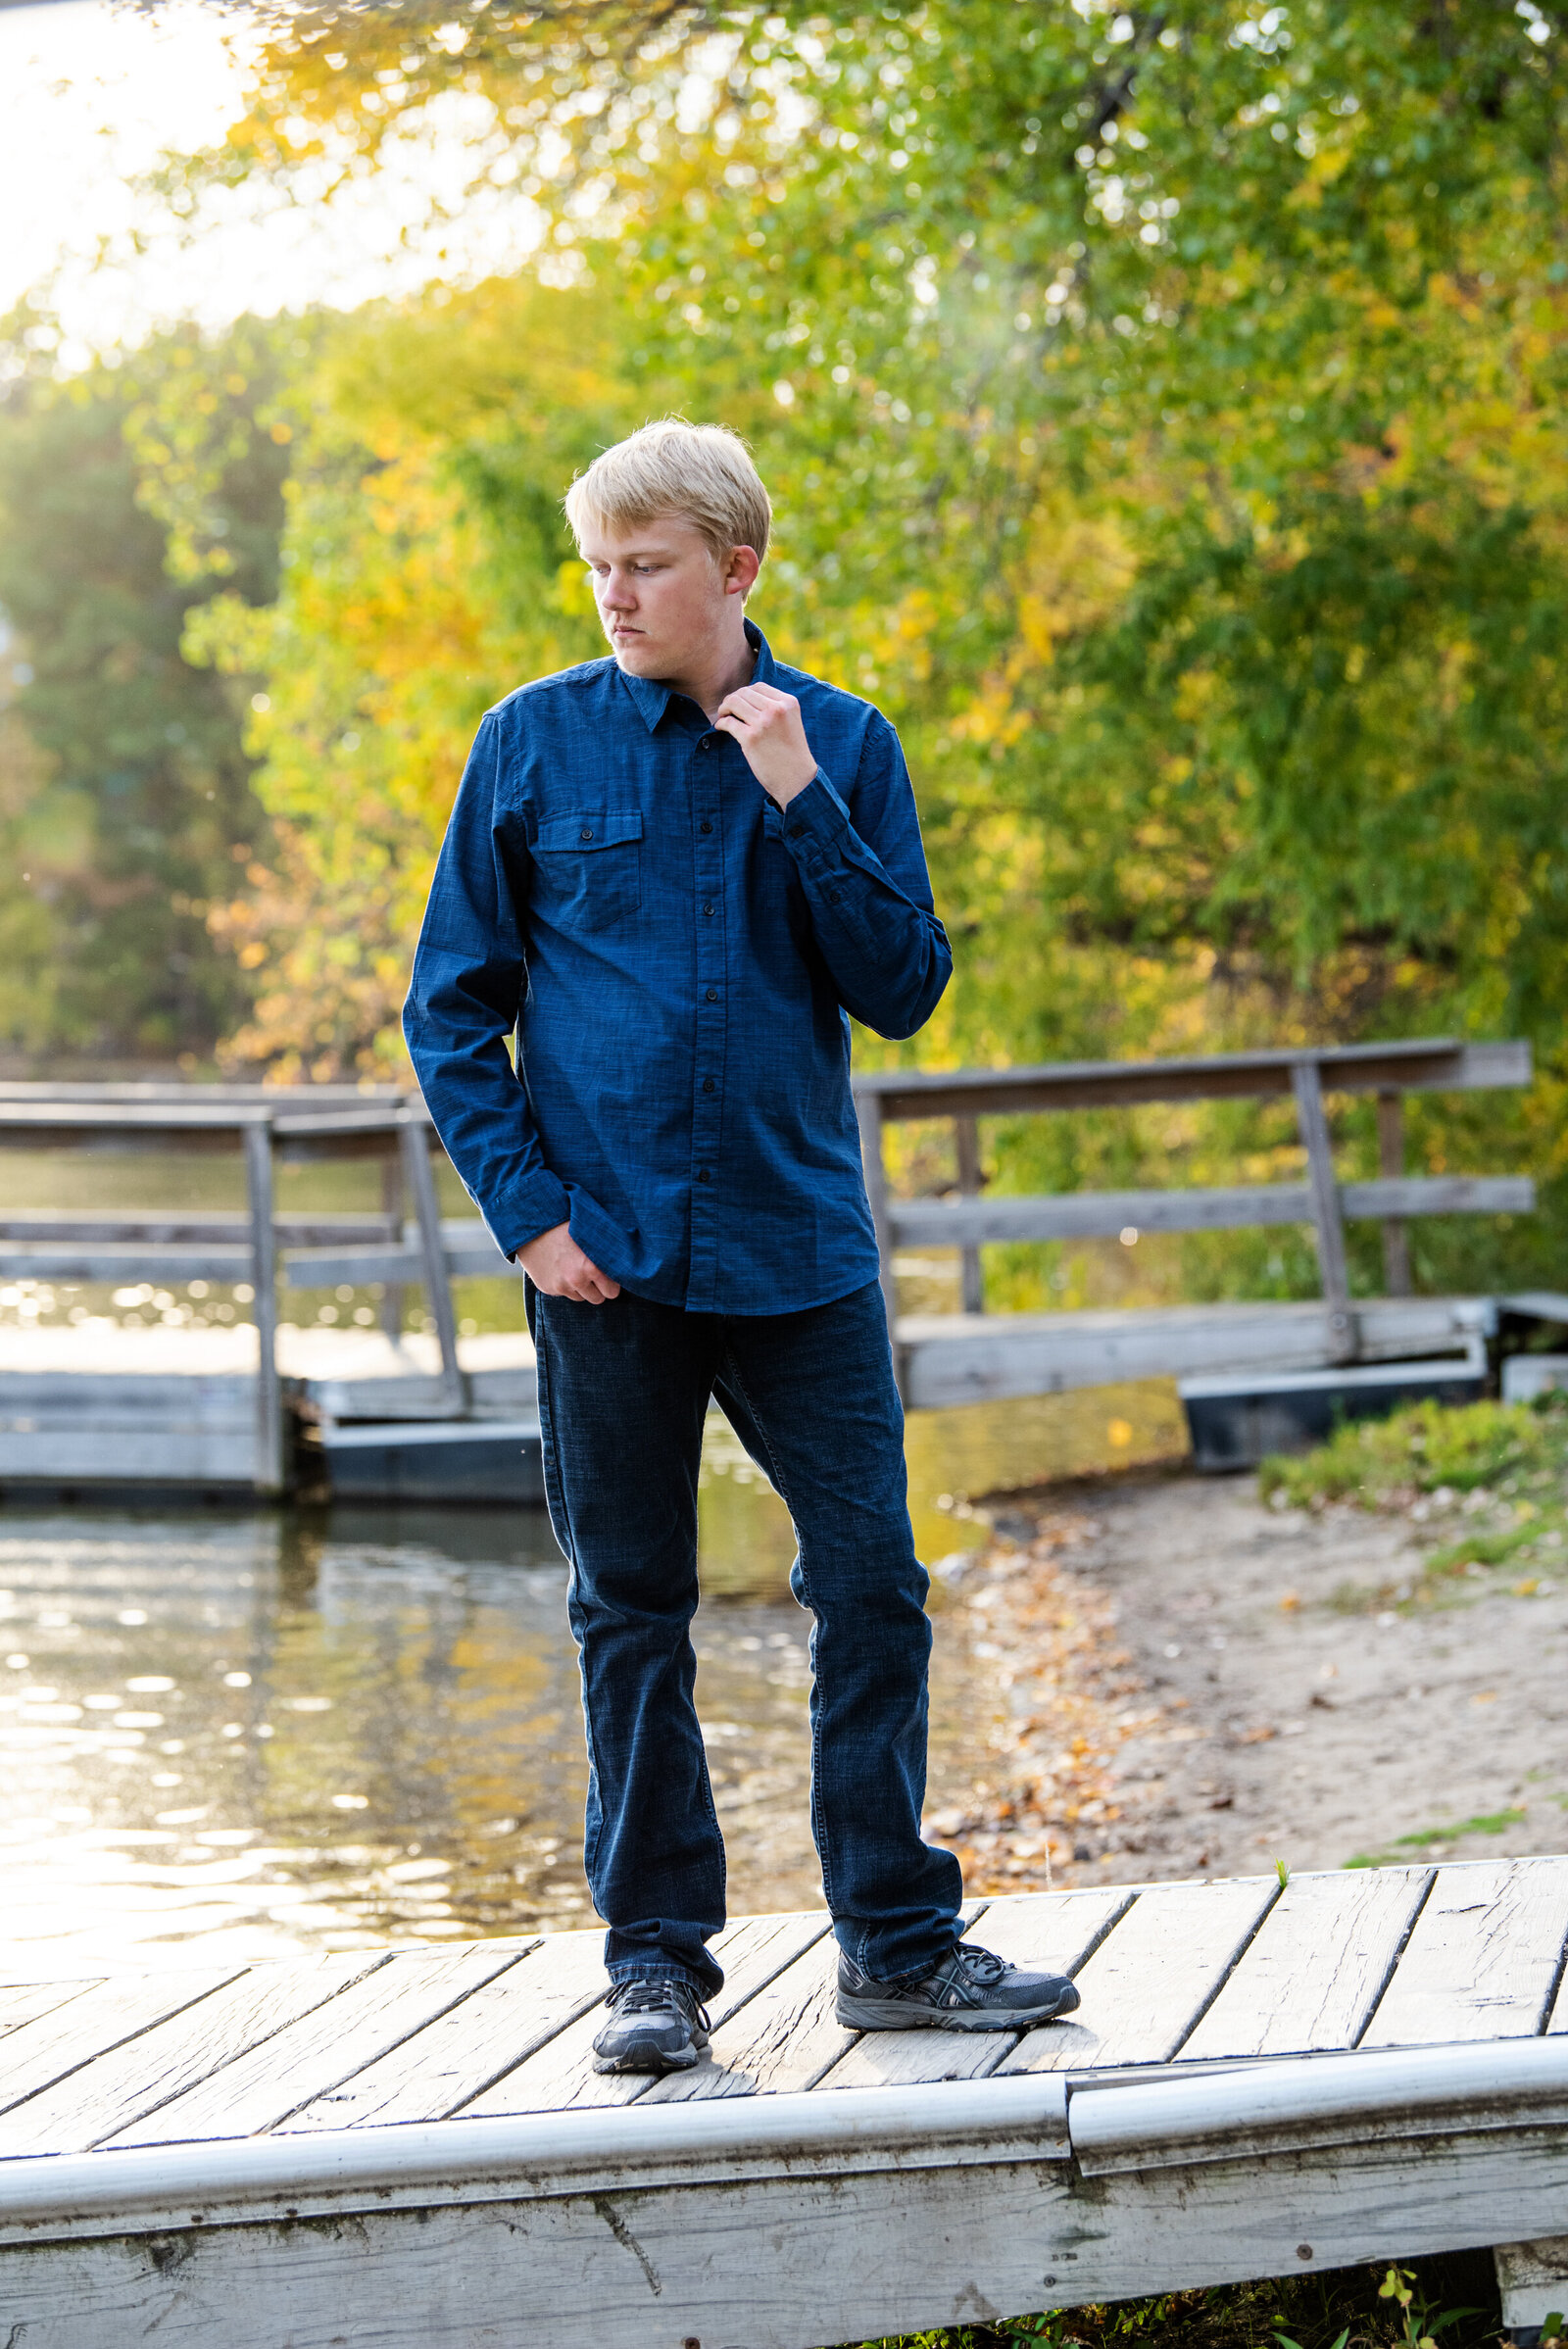 St. Anthony Village Minnesota high school senior wearing a casual outfit on the dock in nature